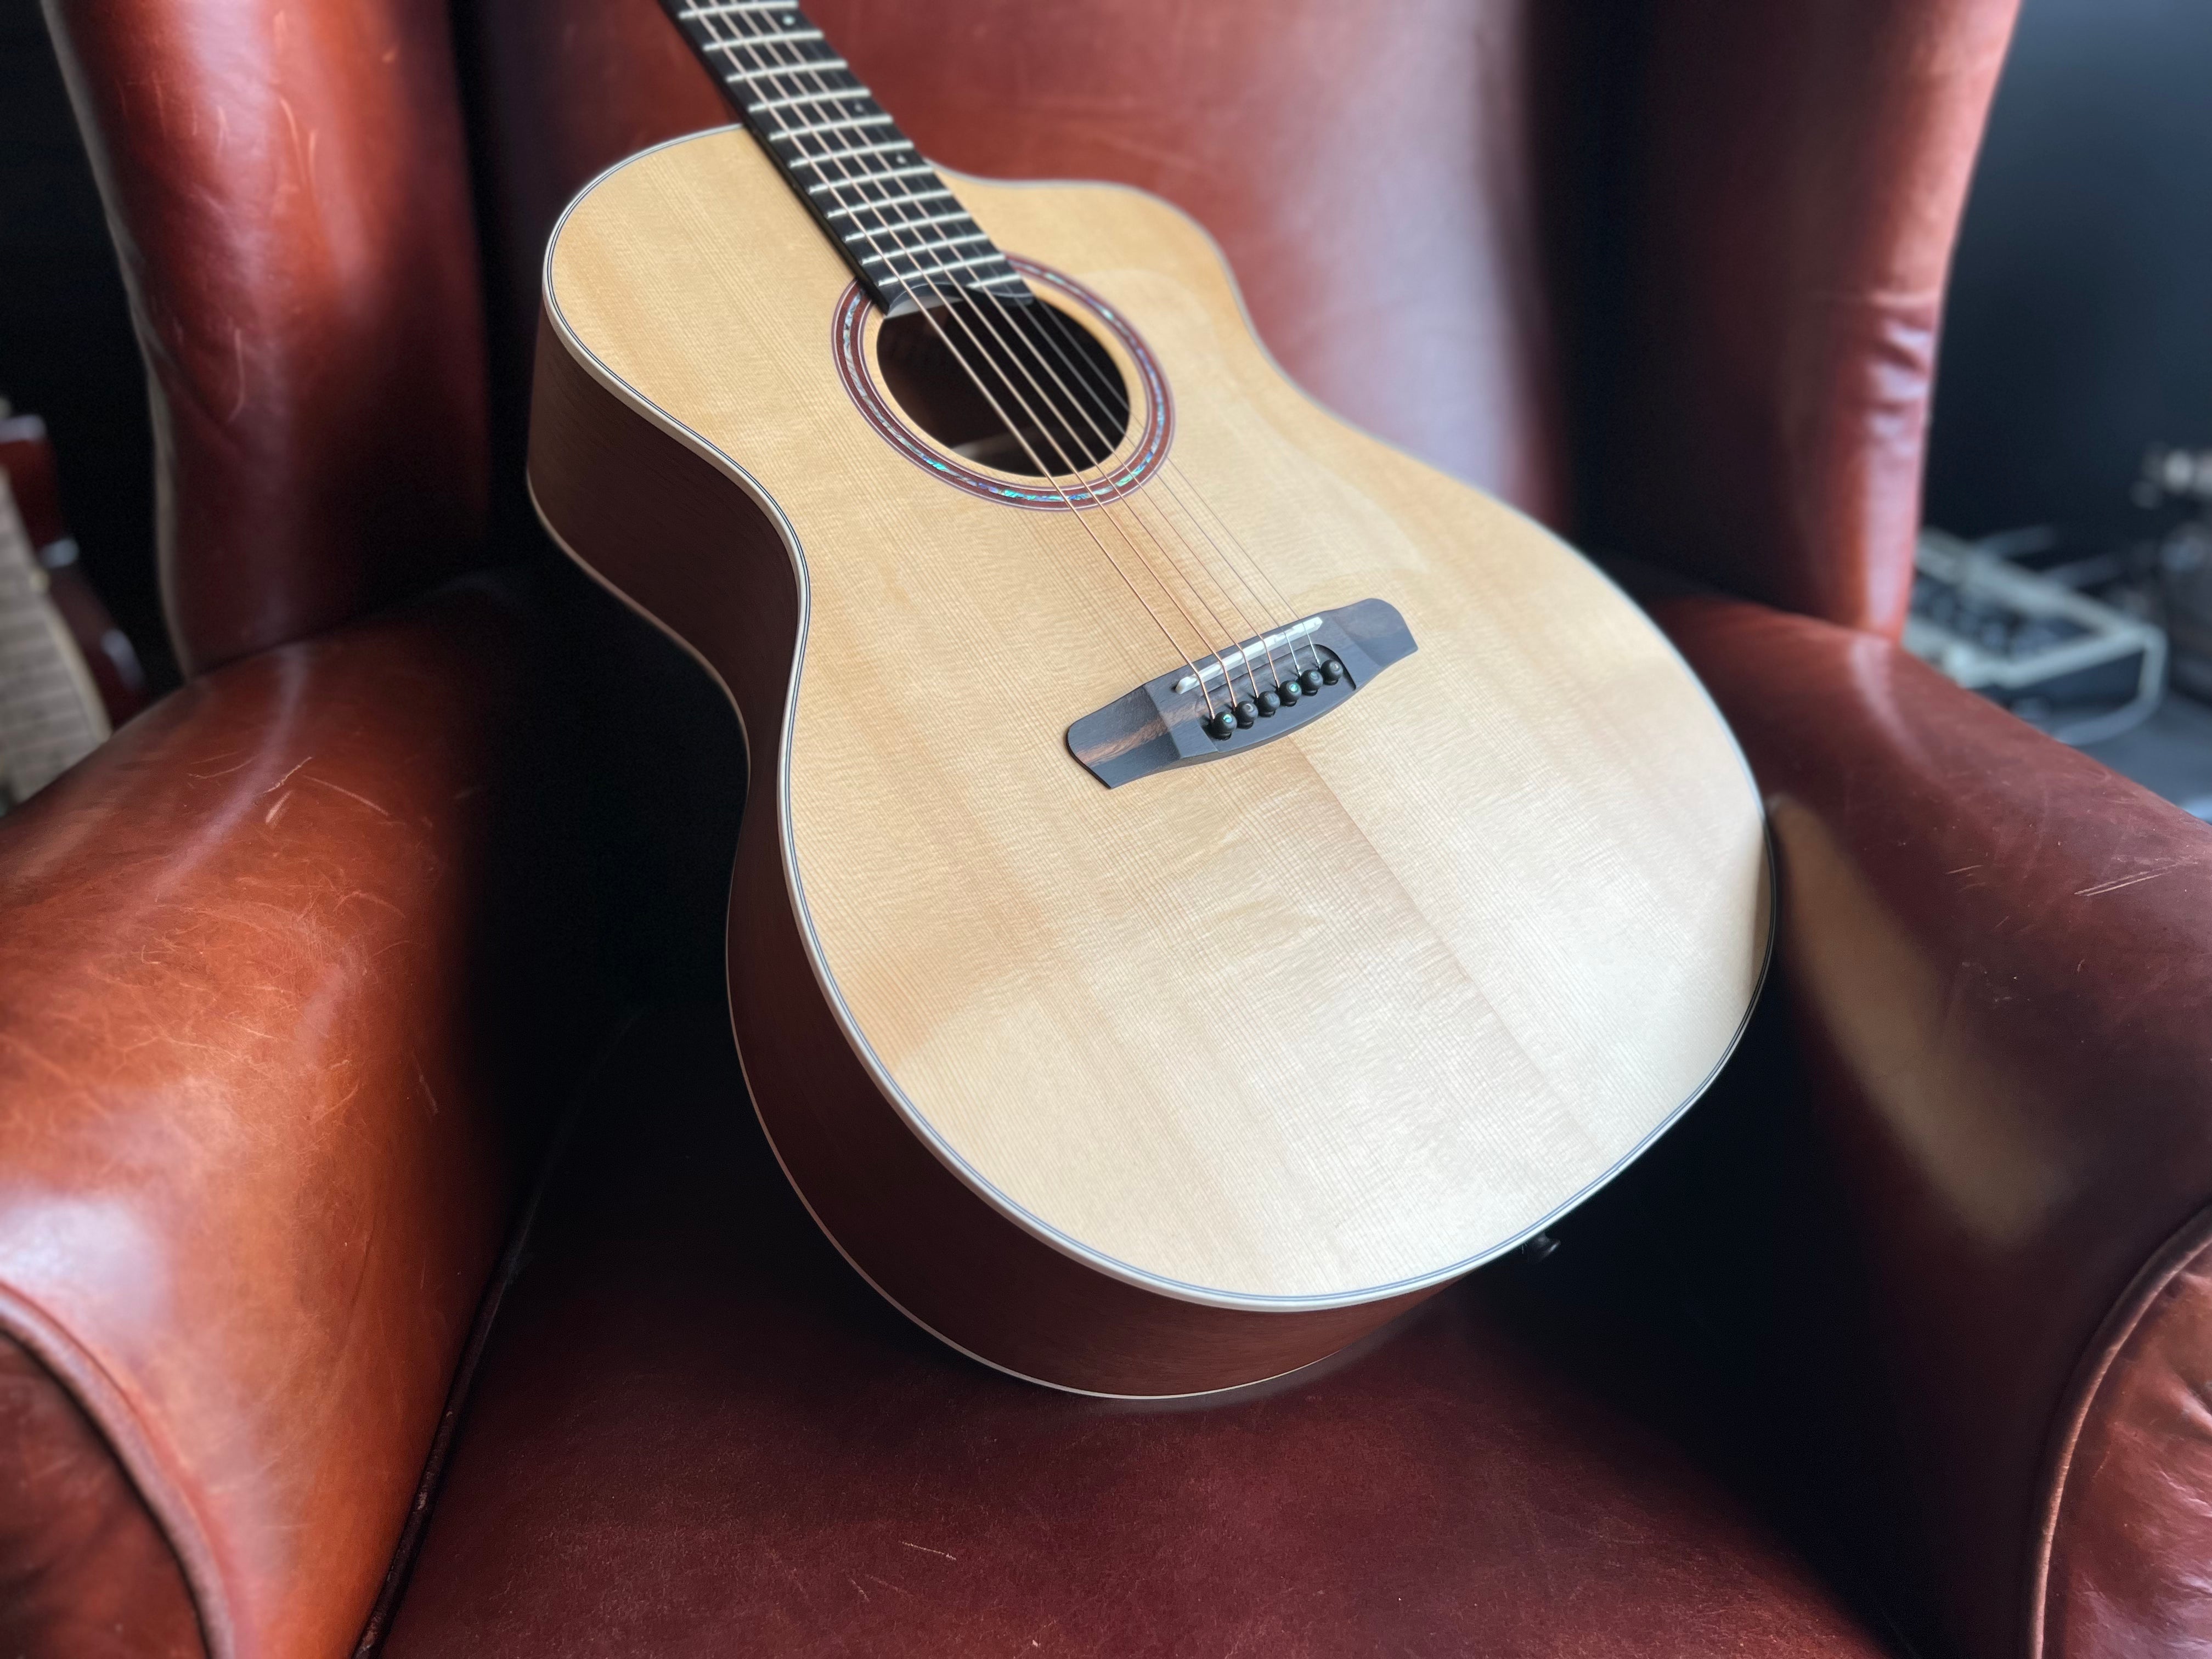 Dowina Walnut GAC Deluxe Torrified Swiss Moon Spruce, Acoustic Guitar for sale at Richards Guitars.